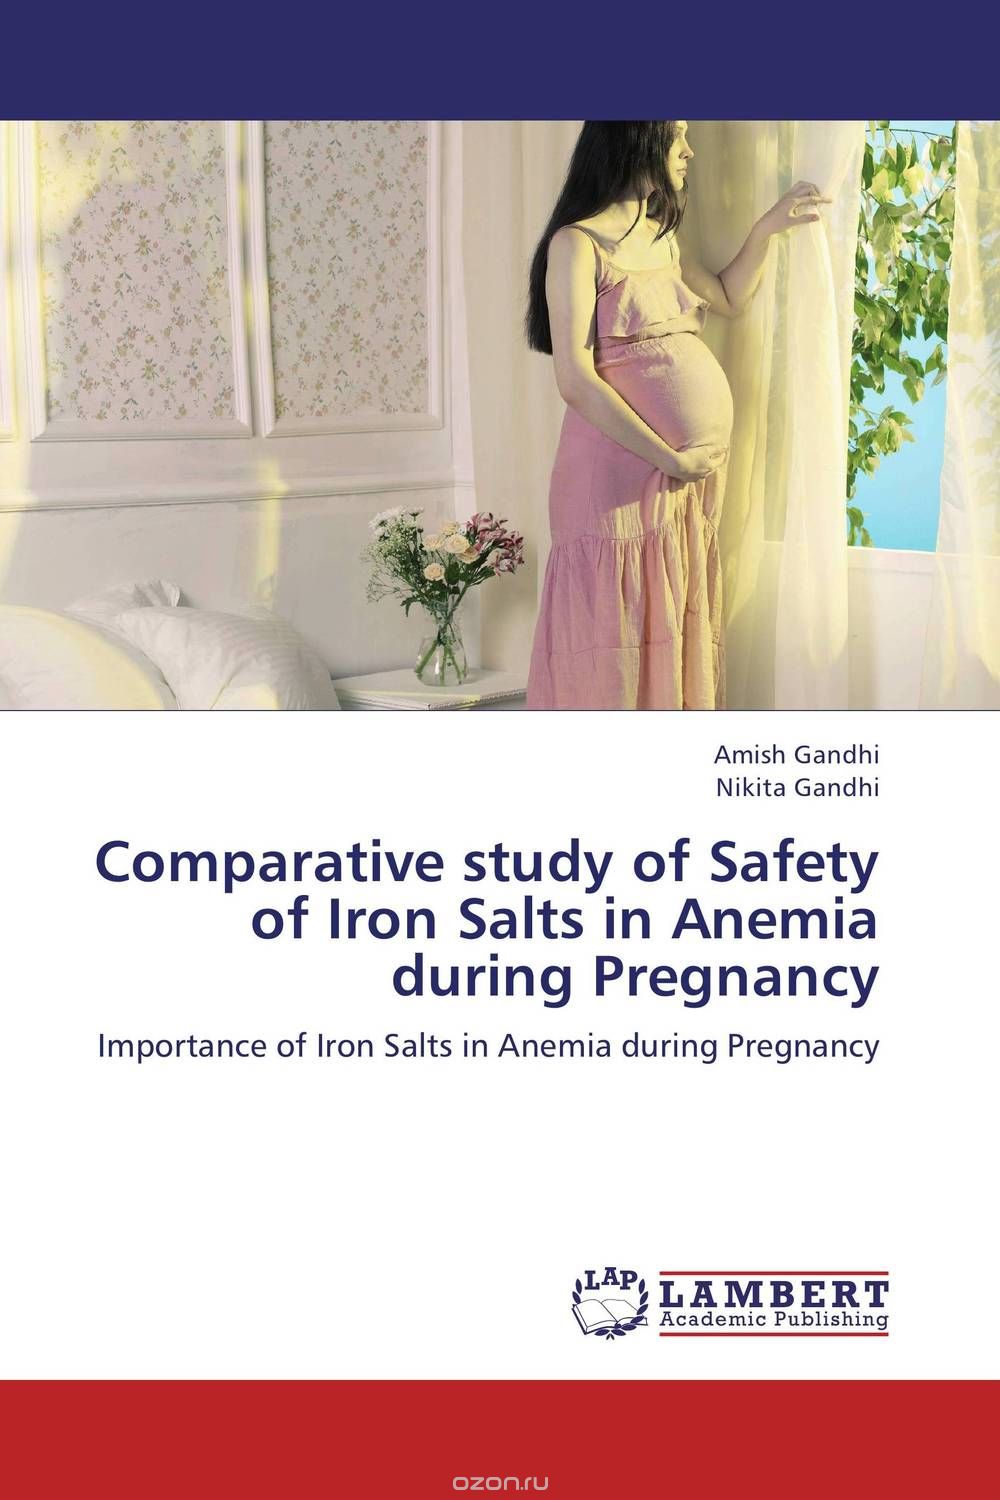 Comparative study of Safety of Iron Salts in Anemia during Pregnancy